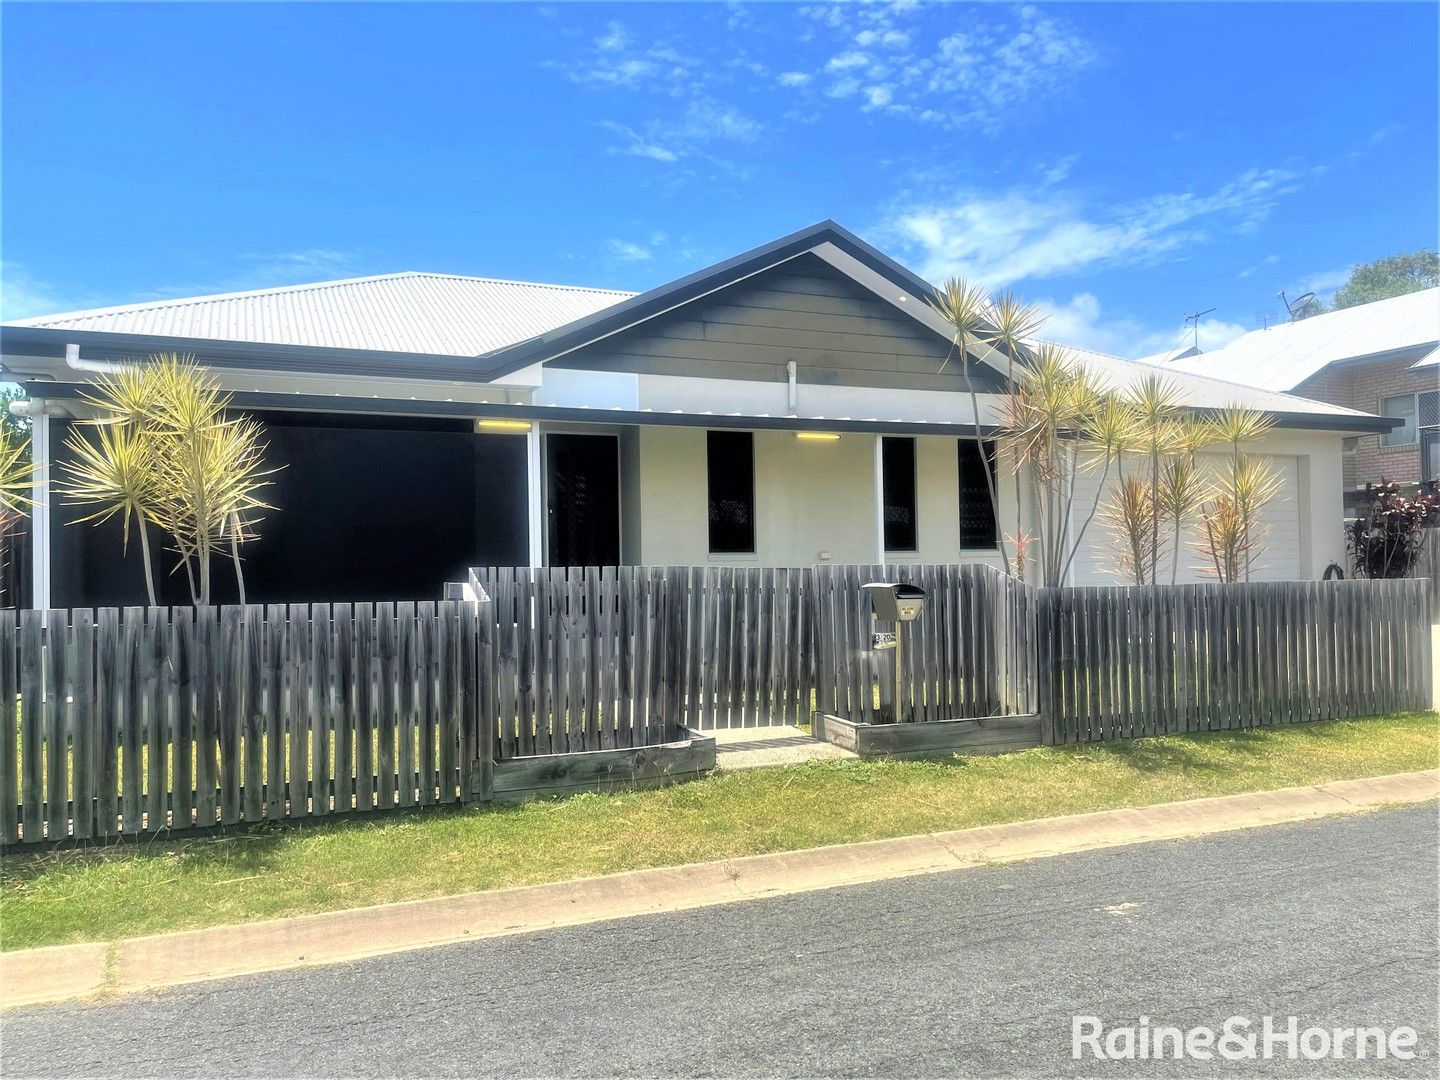 2 bedrooms Villa in 3/20 Forth Street SOUTH MACKAY QLD, 4740